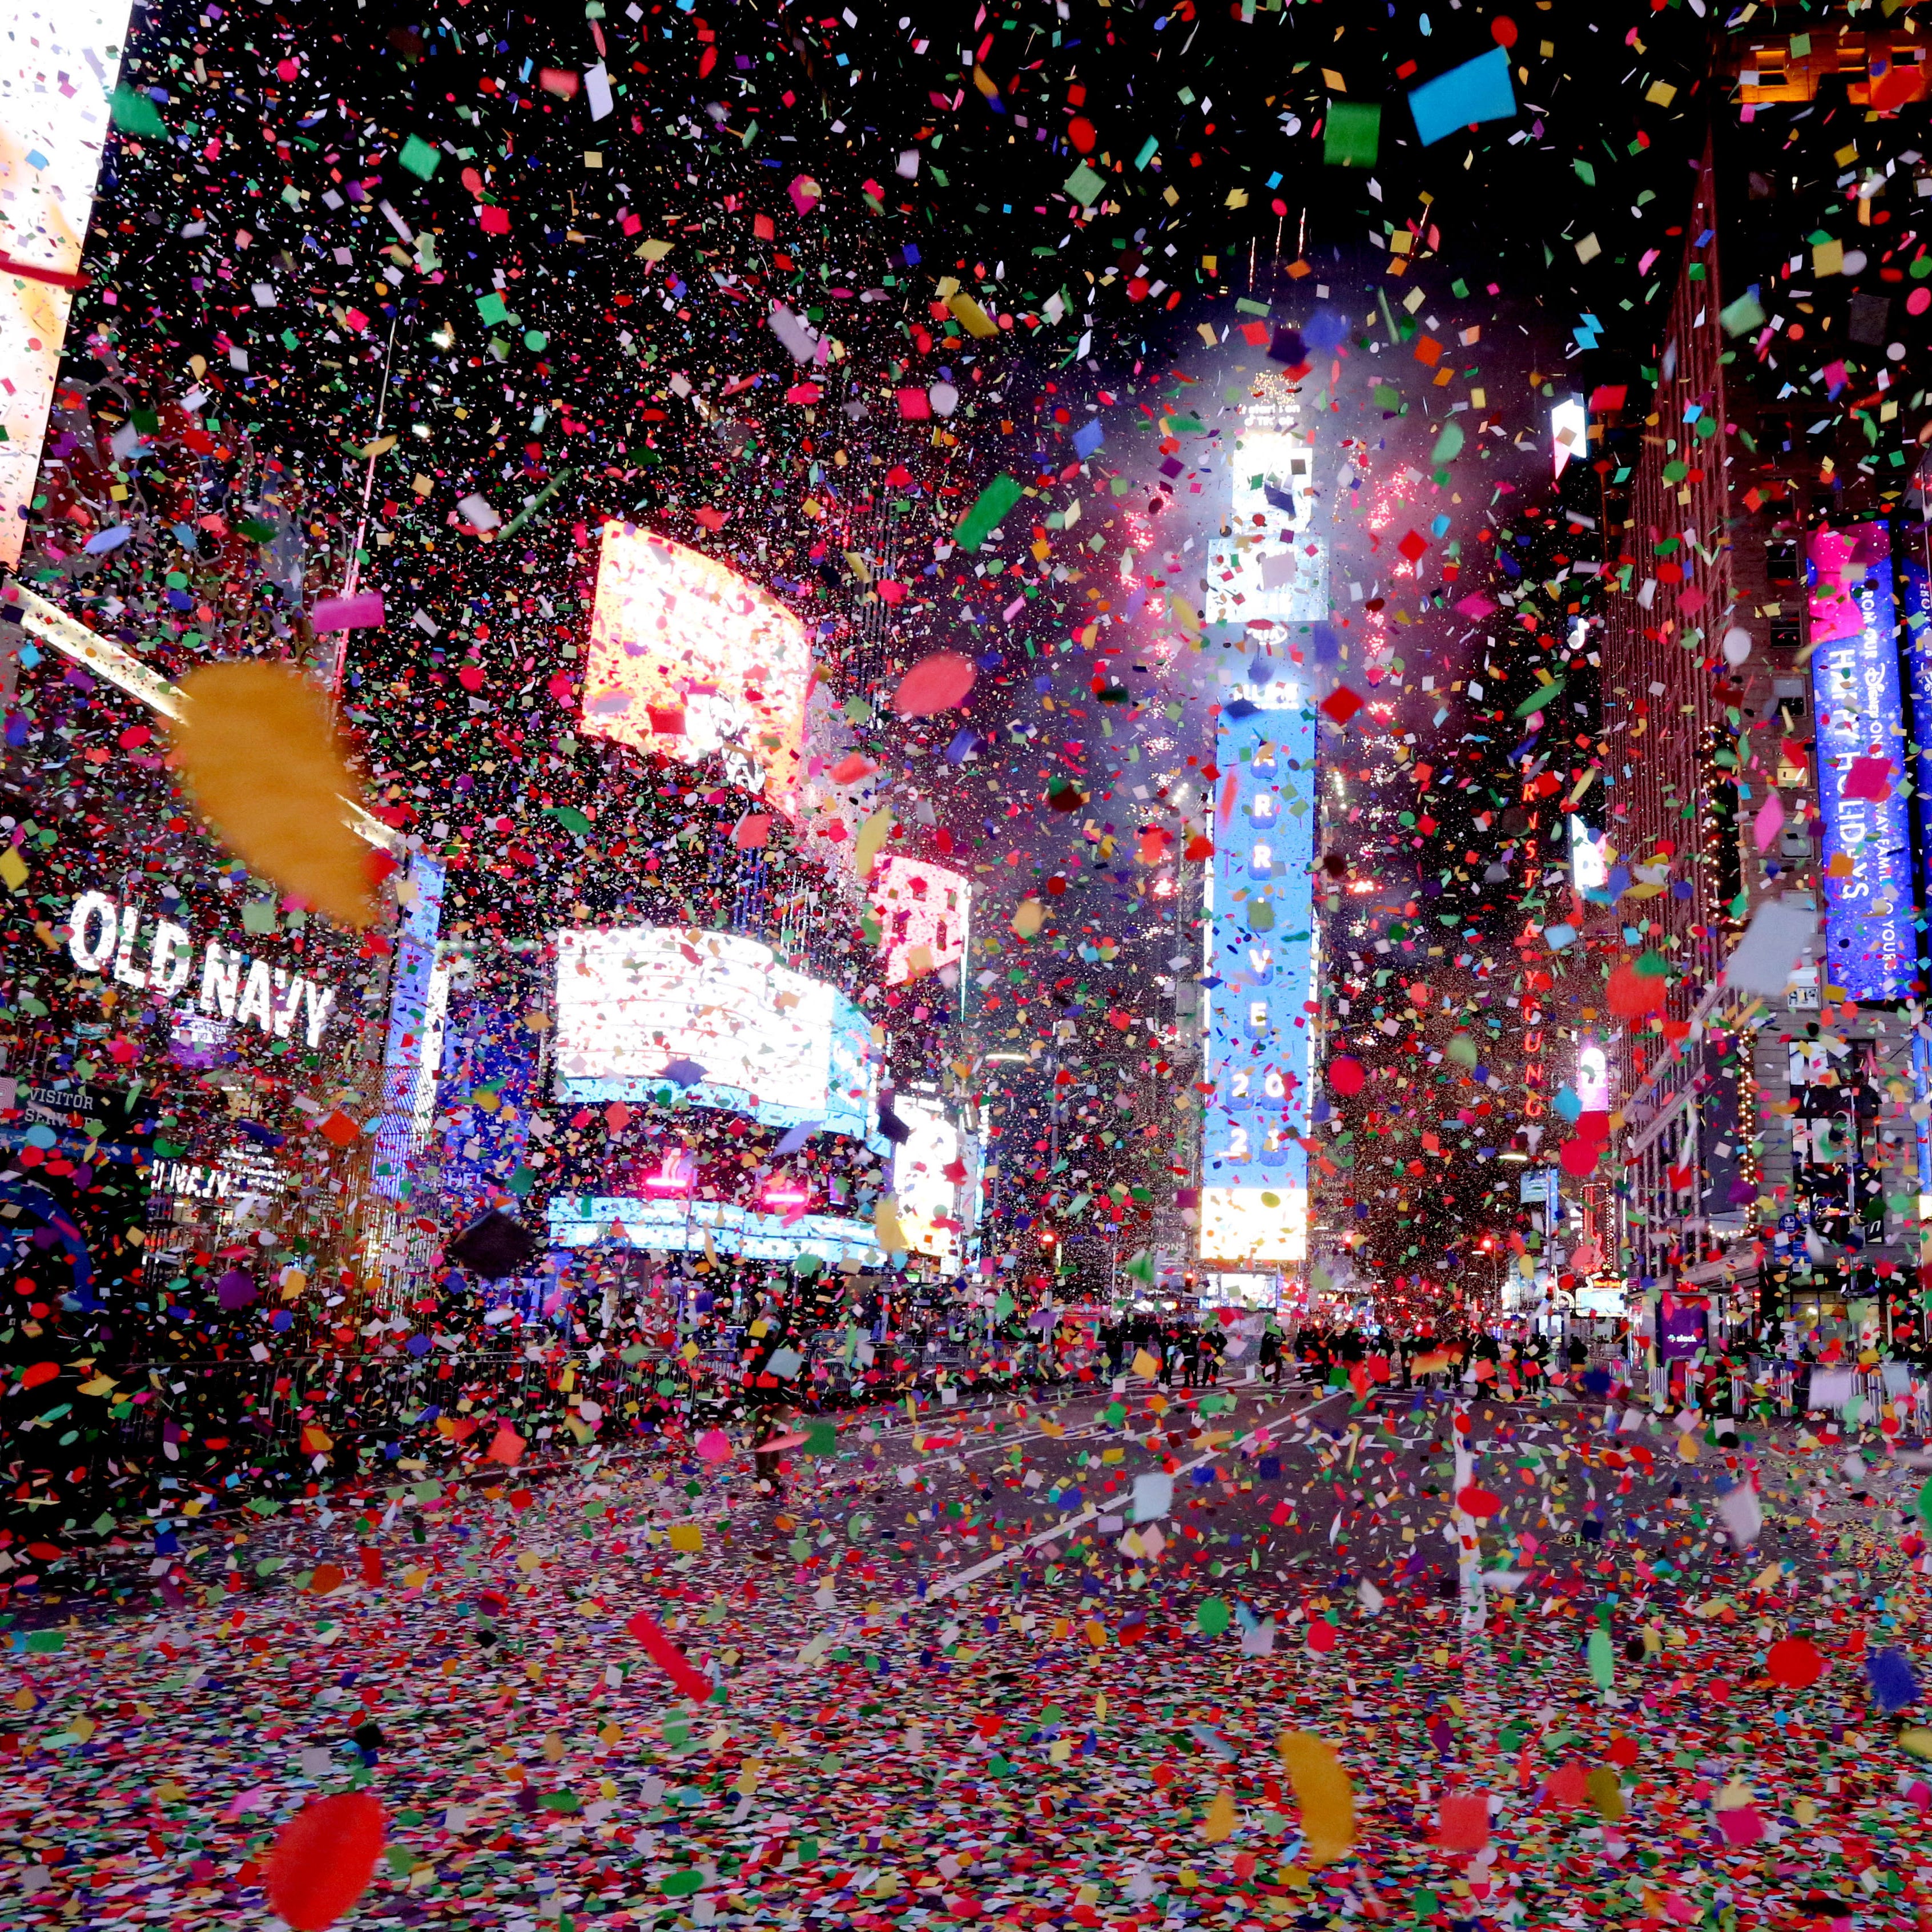 Confetti rains down on an empty Times Square in Manhattan after the ball dropped Jan. 1, marking the start of 2021. Times Square, usually packed with thousands, was closed to all but a few because of COVID-19 restrictions.